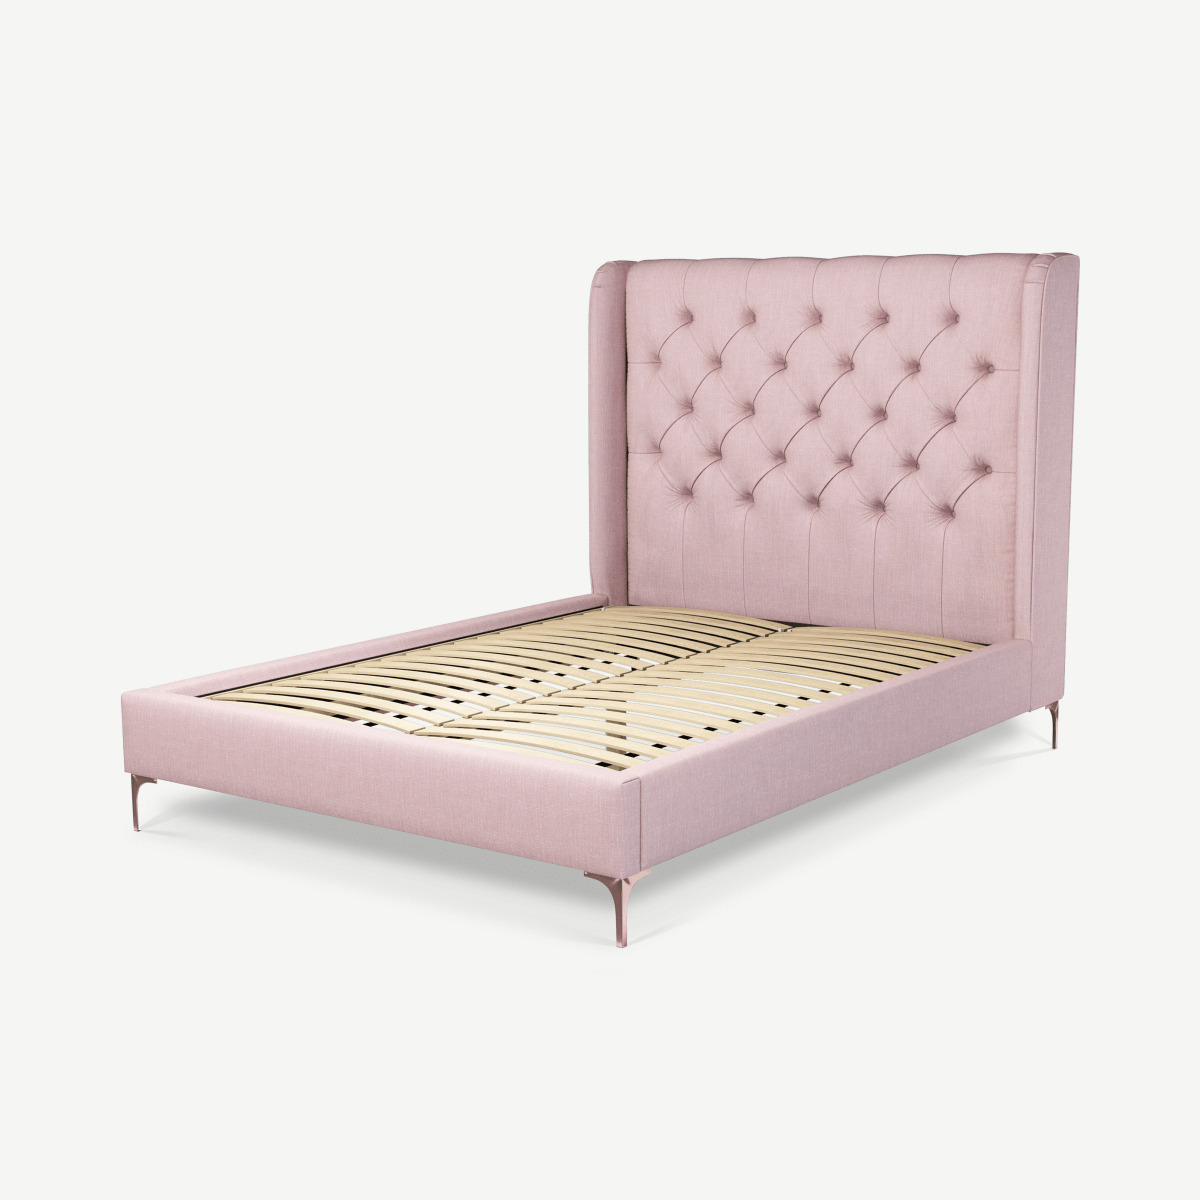 Romare Double Bed, Tea Rose Pink Cotton with Copper Legs